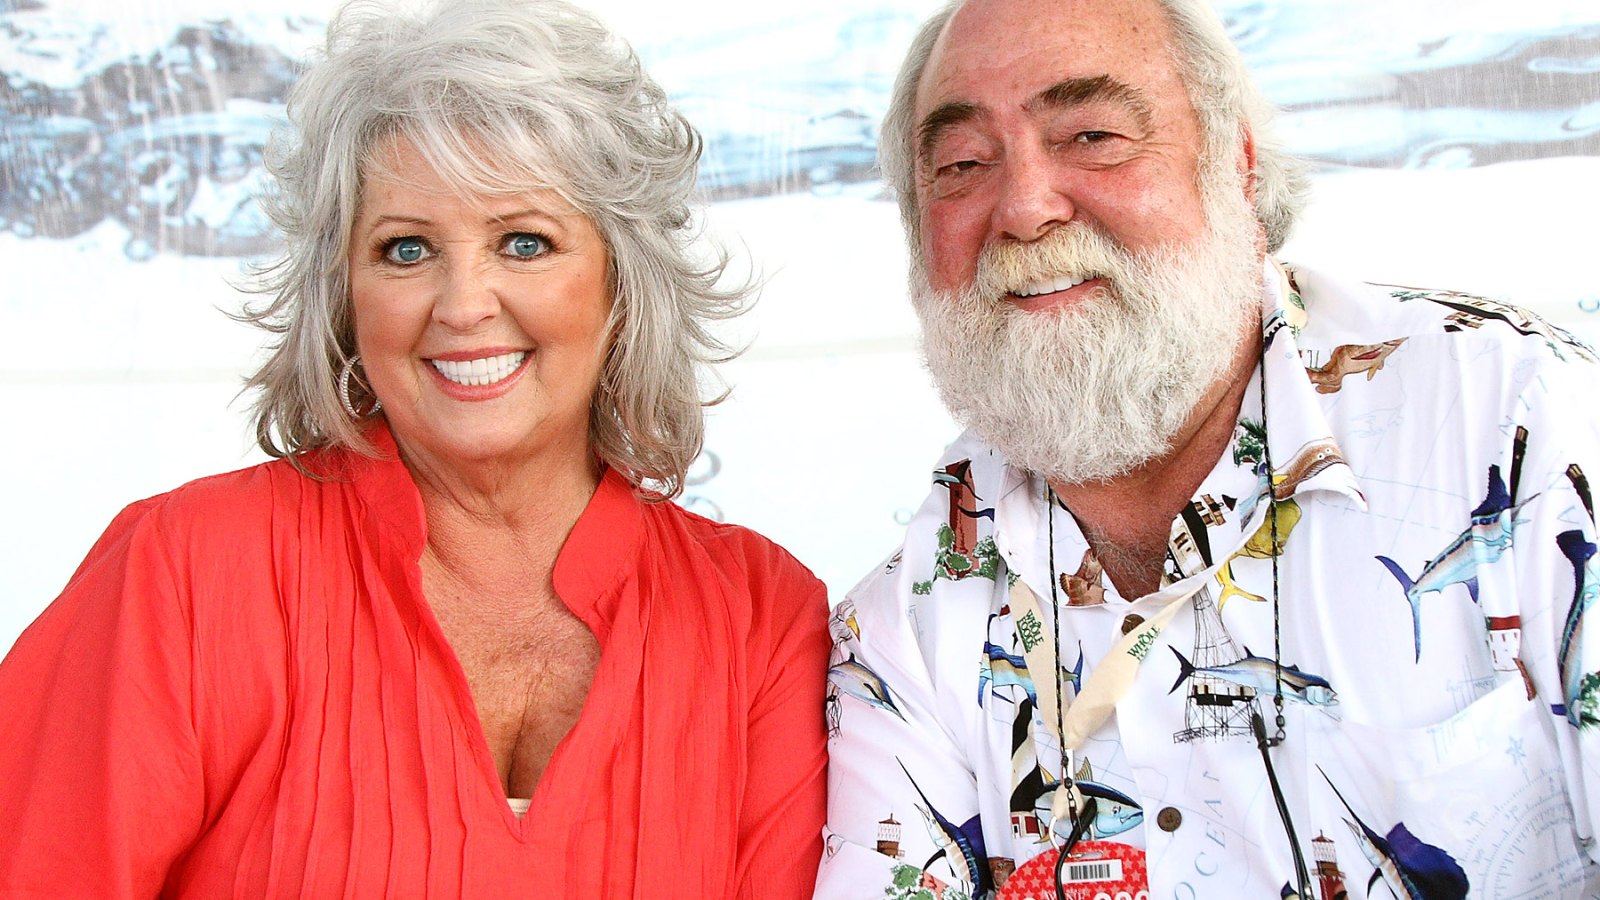 Paula Deen and Michael Groover on February 22, 2009 in South Beach